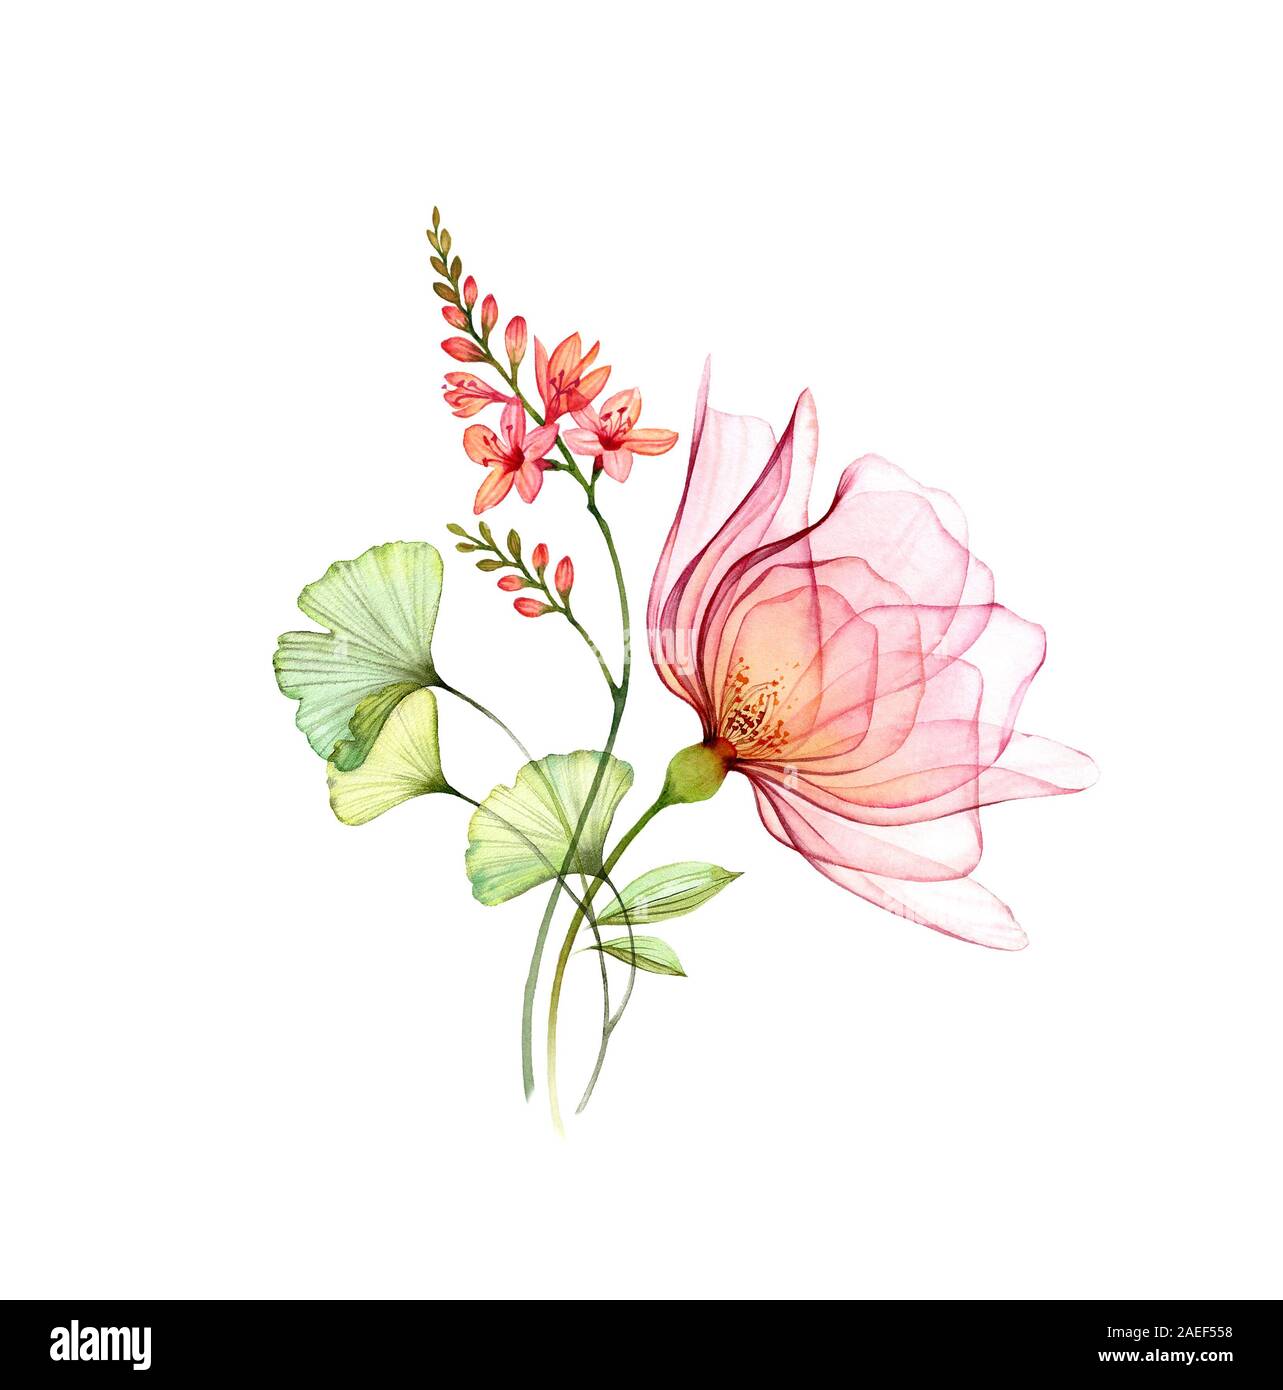 Transparent rose with freesia flowers and leaves. Watercolor floral composition isolated on white. Botanical hand painted illustration for wedding Stock Photo